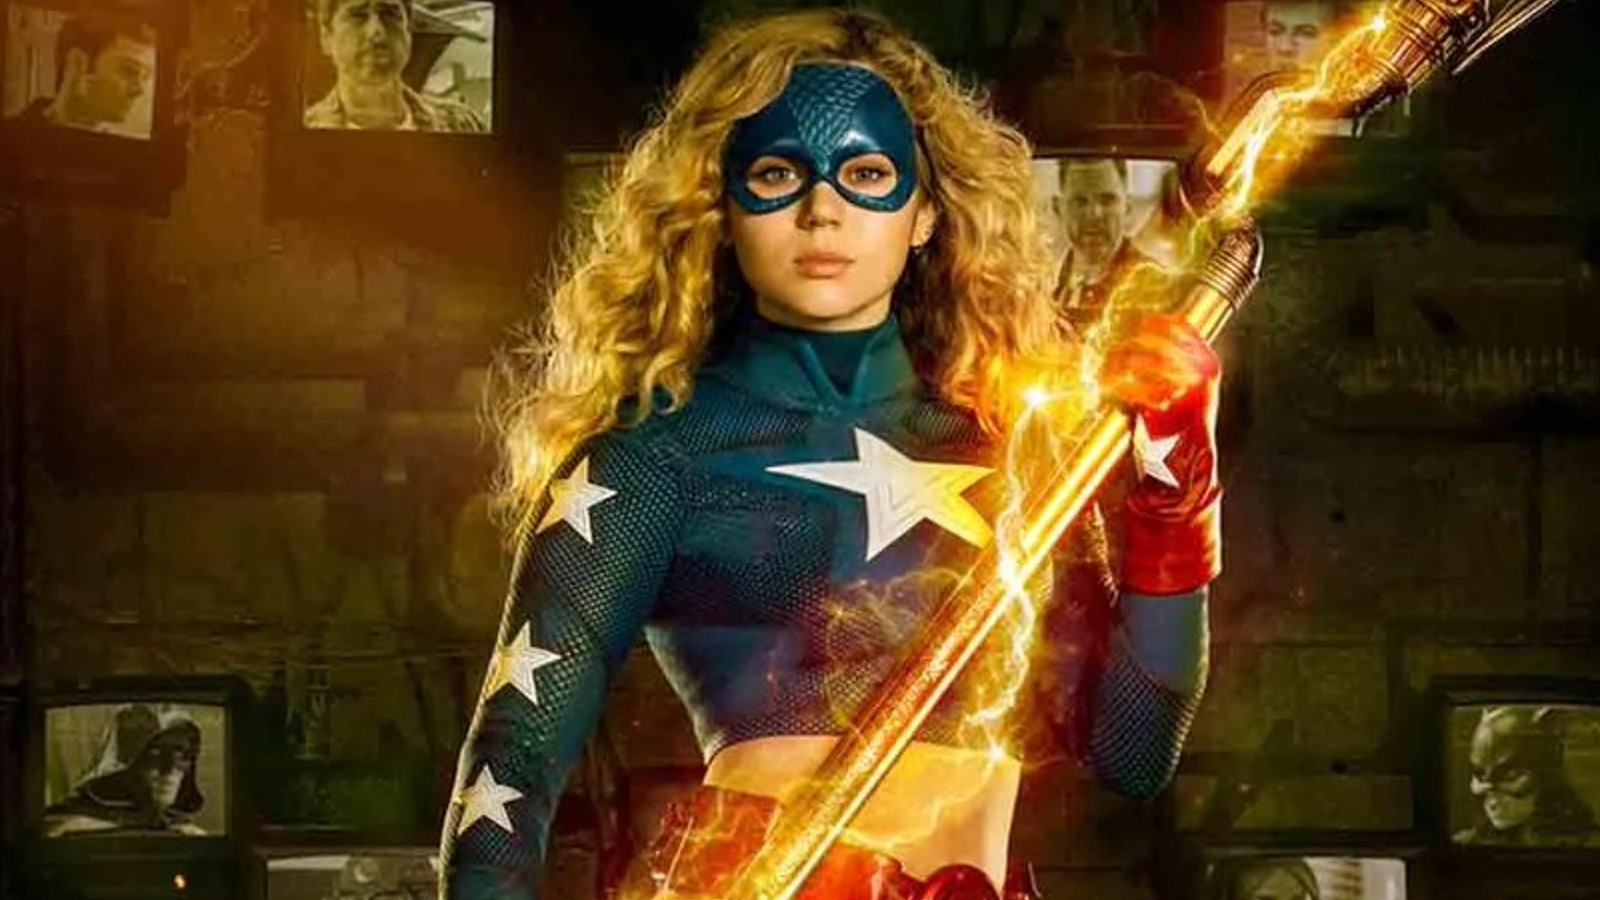 The penultimate ‘Stargirl’ episode has DC fans wishing The CW would walk back its cancellation